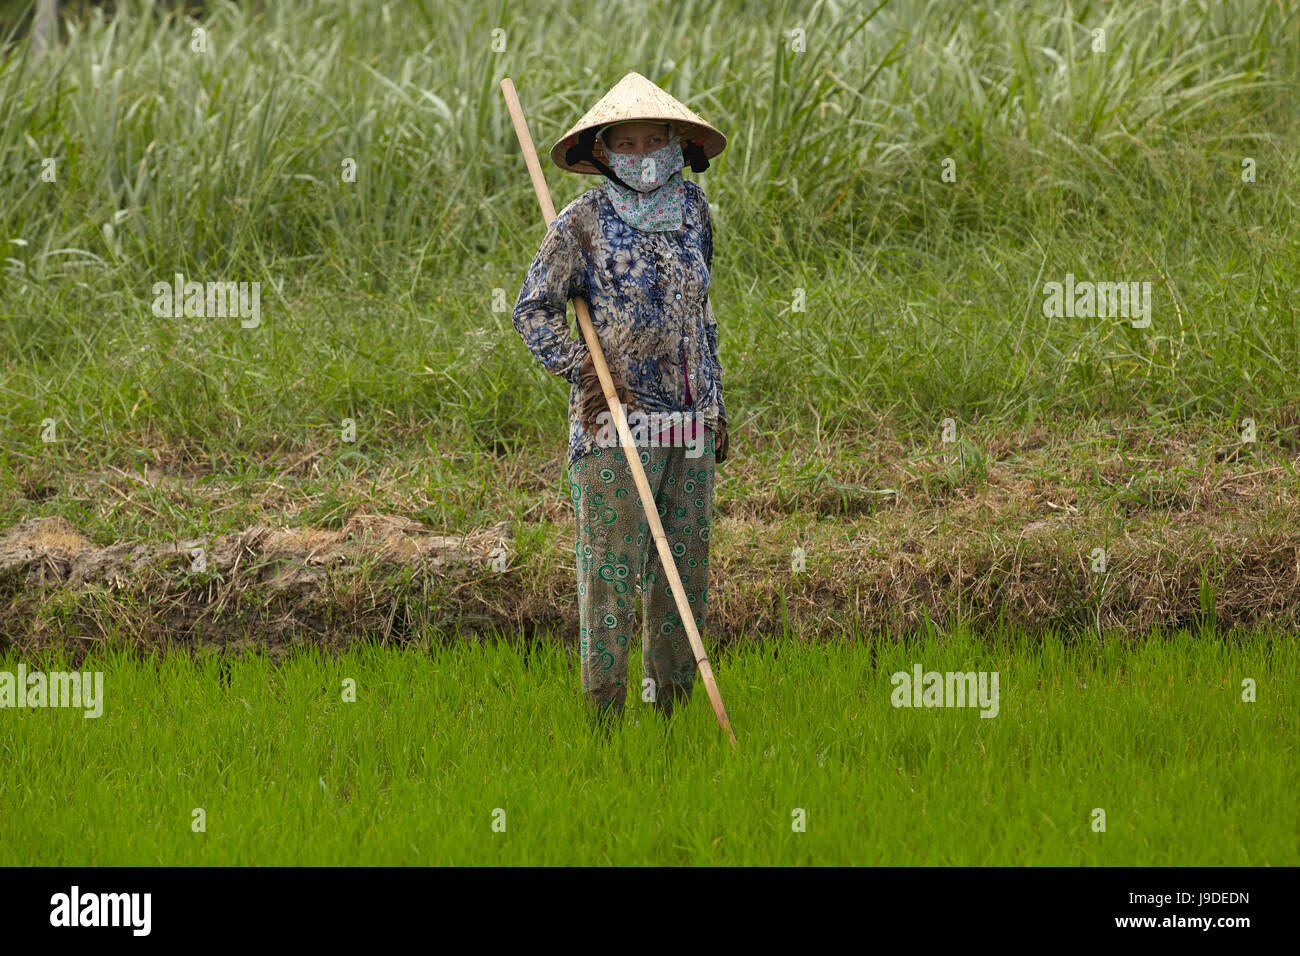 Worker in rice paddy, near Tan Hoa, Tien Giang Province, Mekong Delta, Vietnam Stock Photo